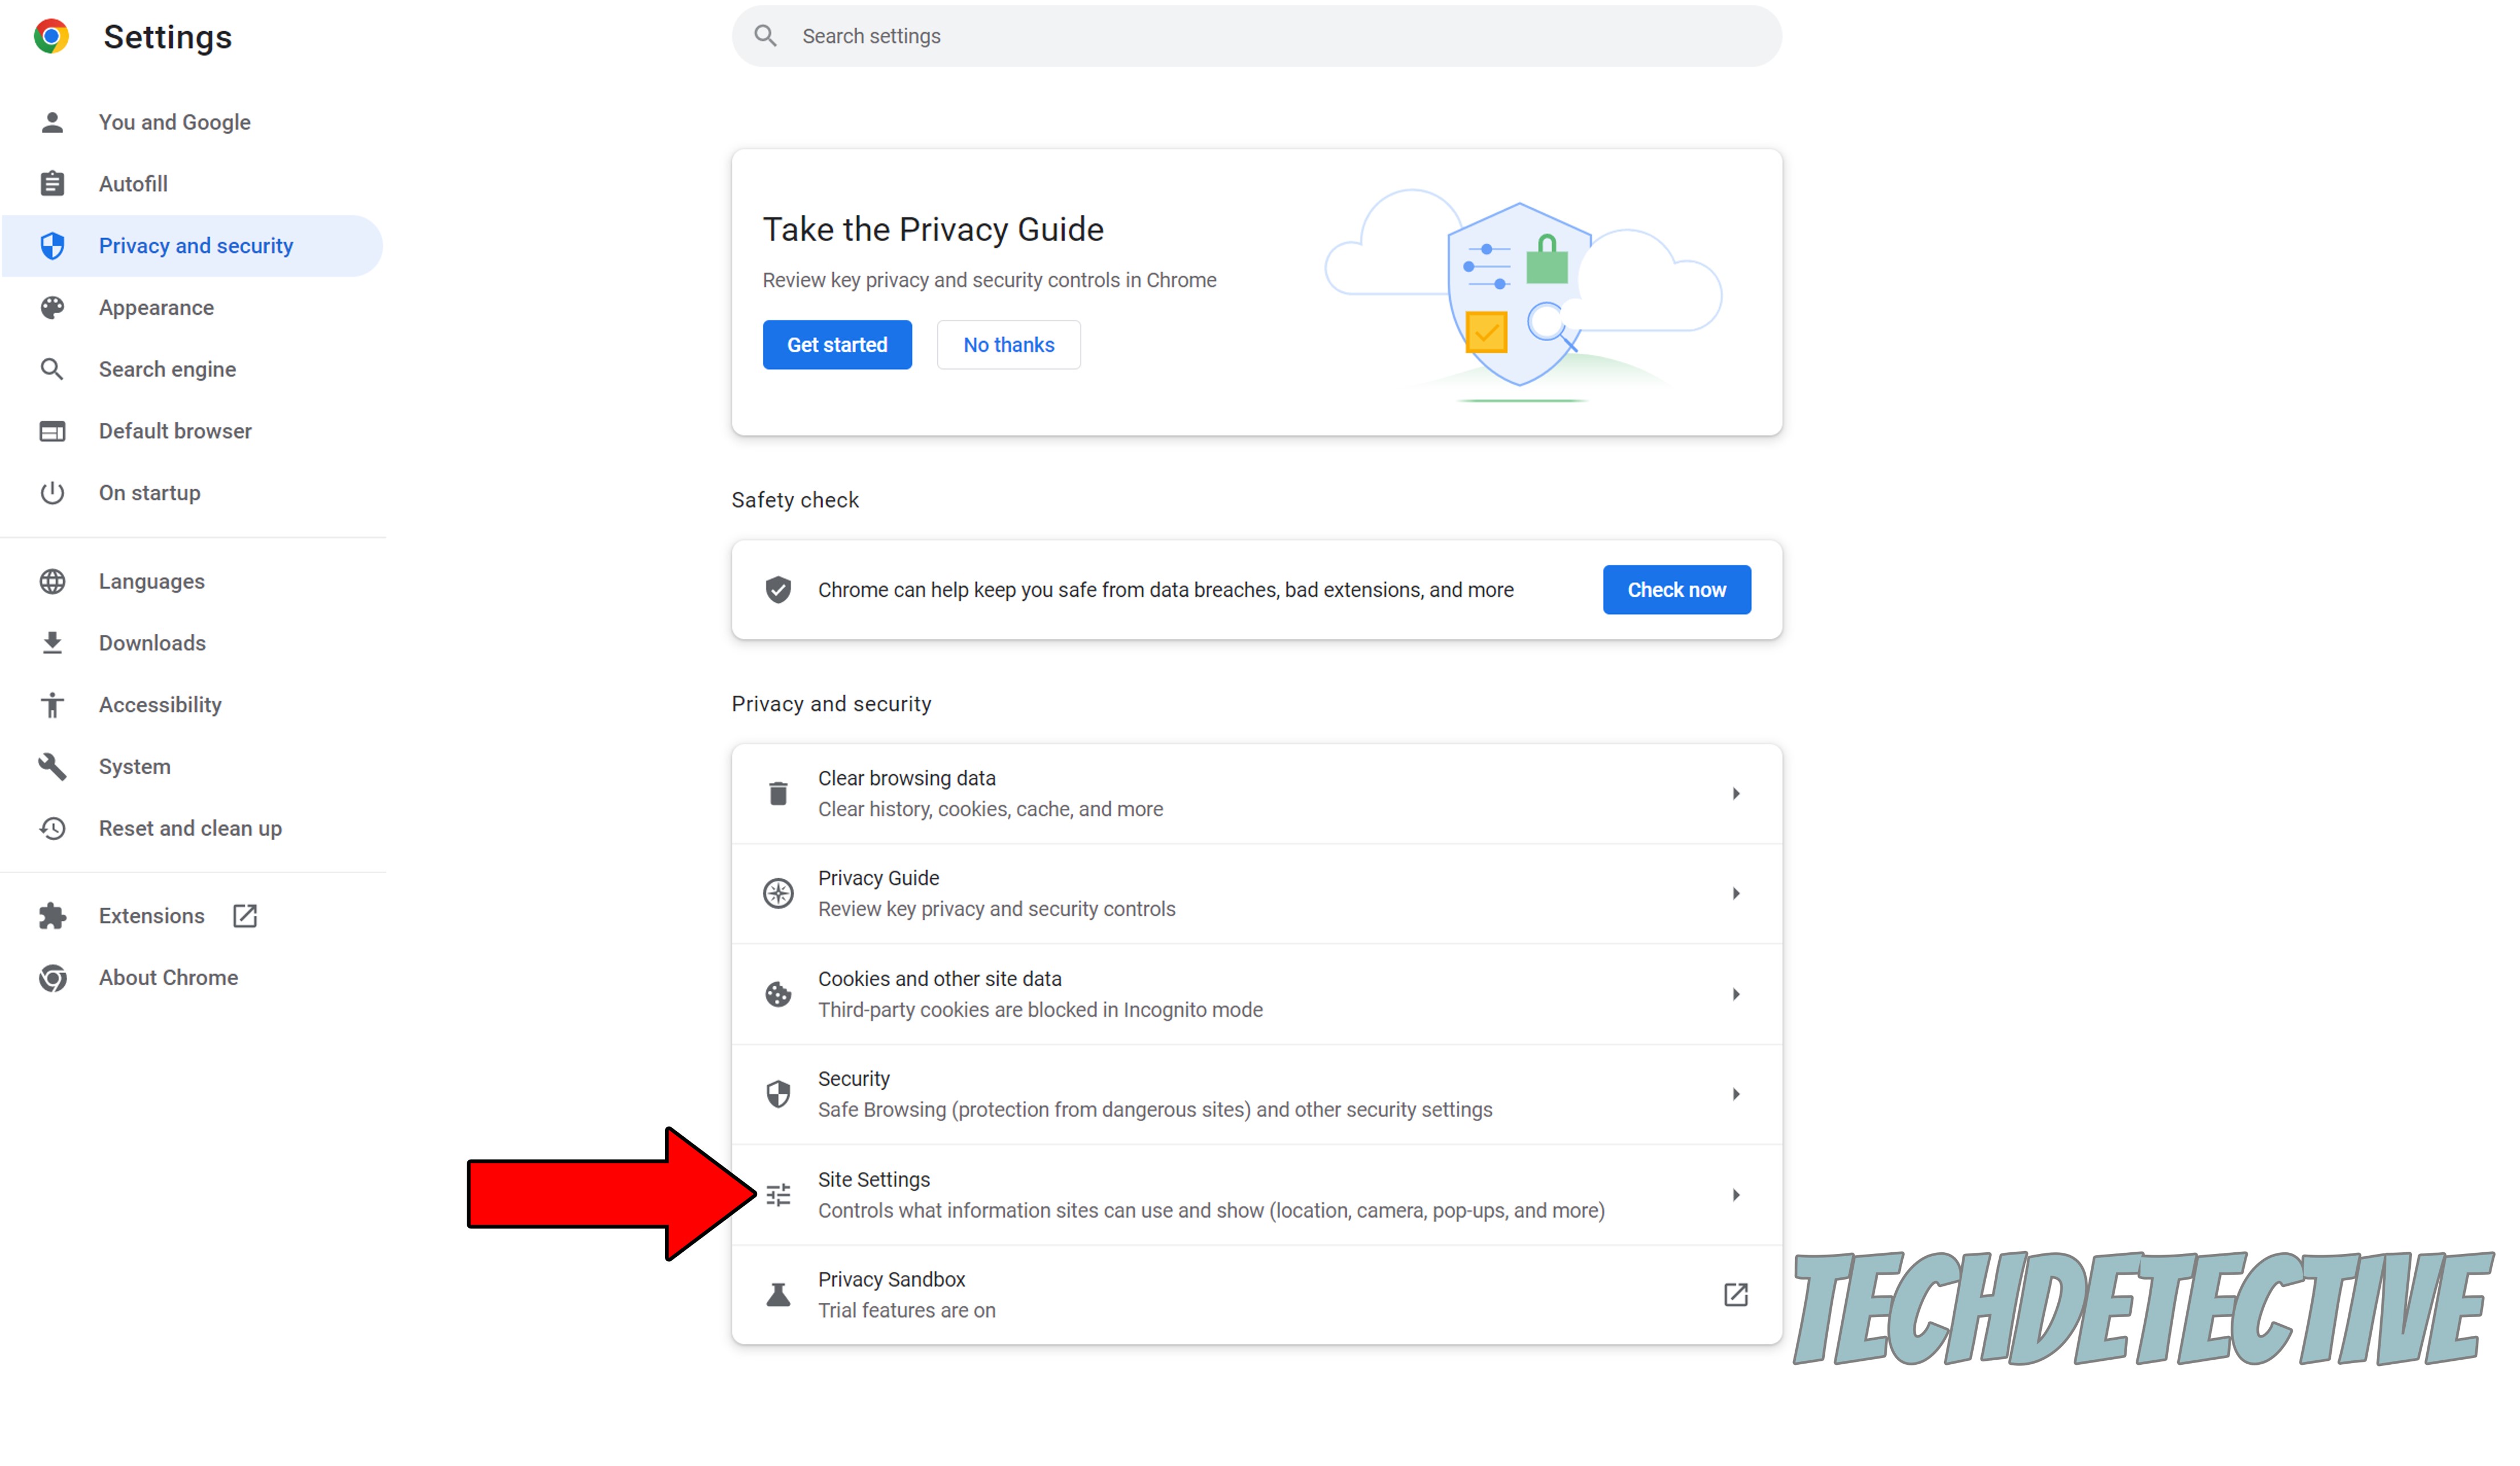 How to edit site settings on Google Chrome